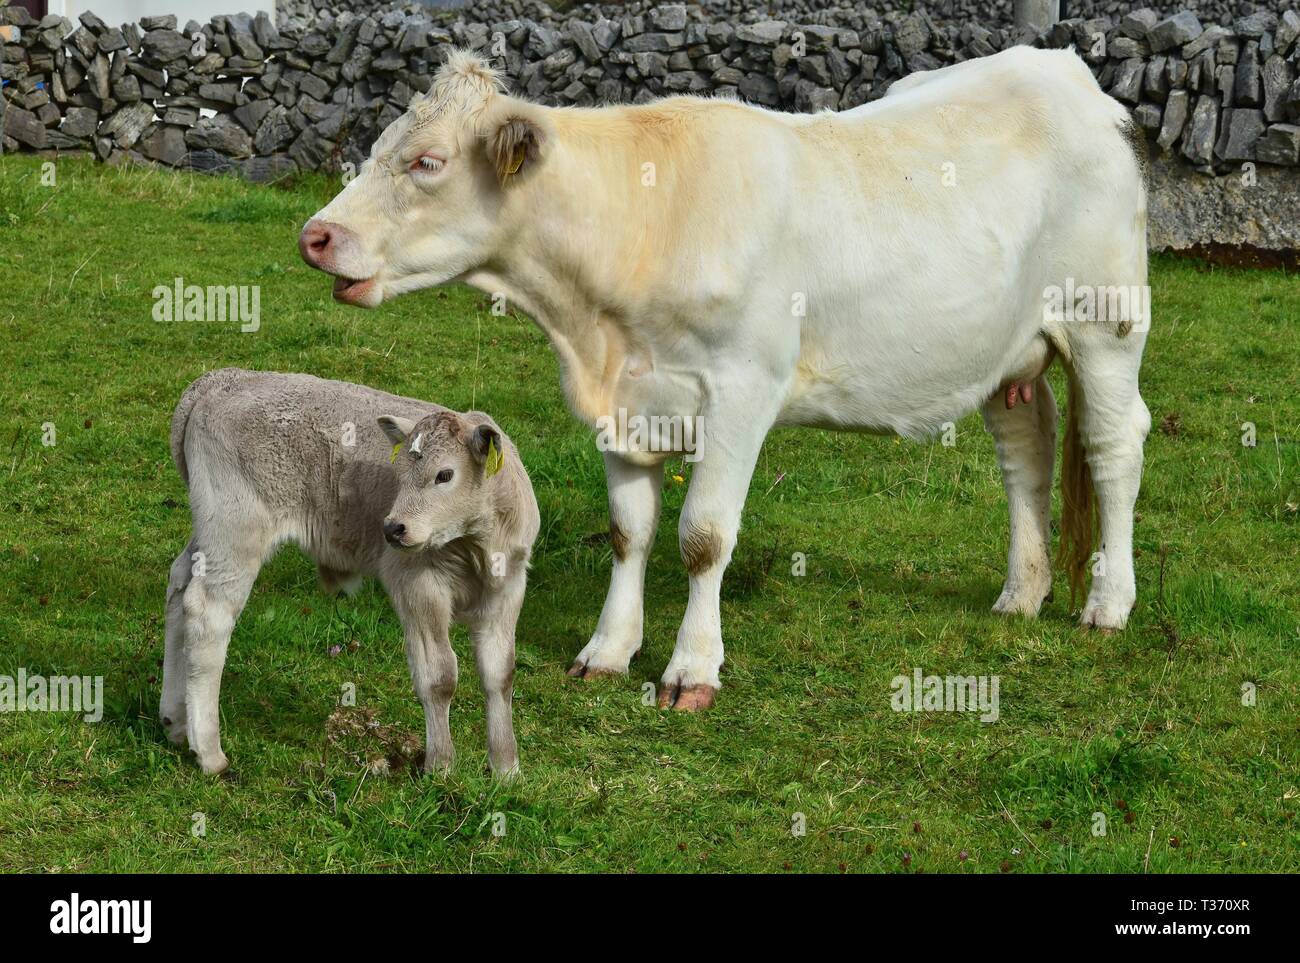 A young calf, a few days old, and its mother on a meadow in Ireland. The dried umbilical cord is still to be seen. Stock Photo